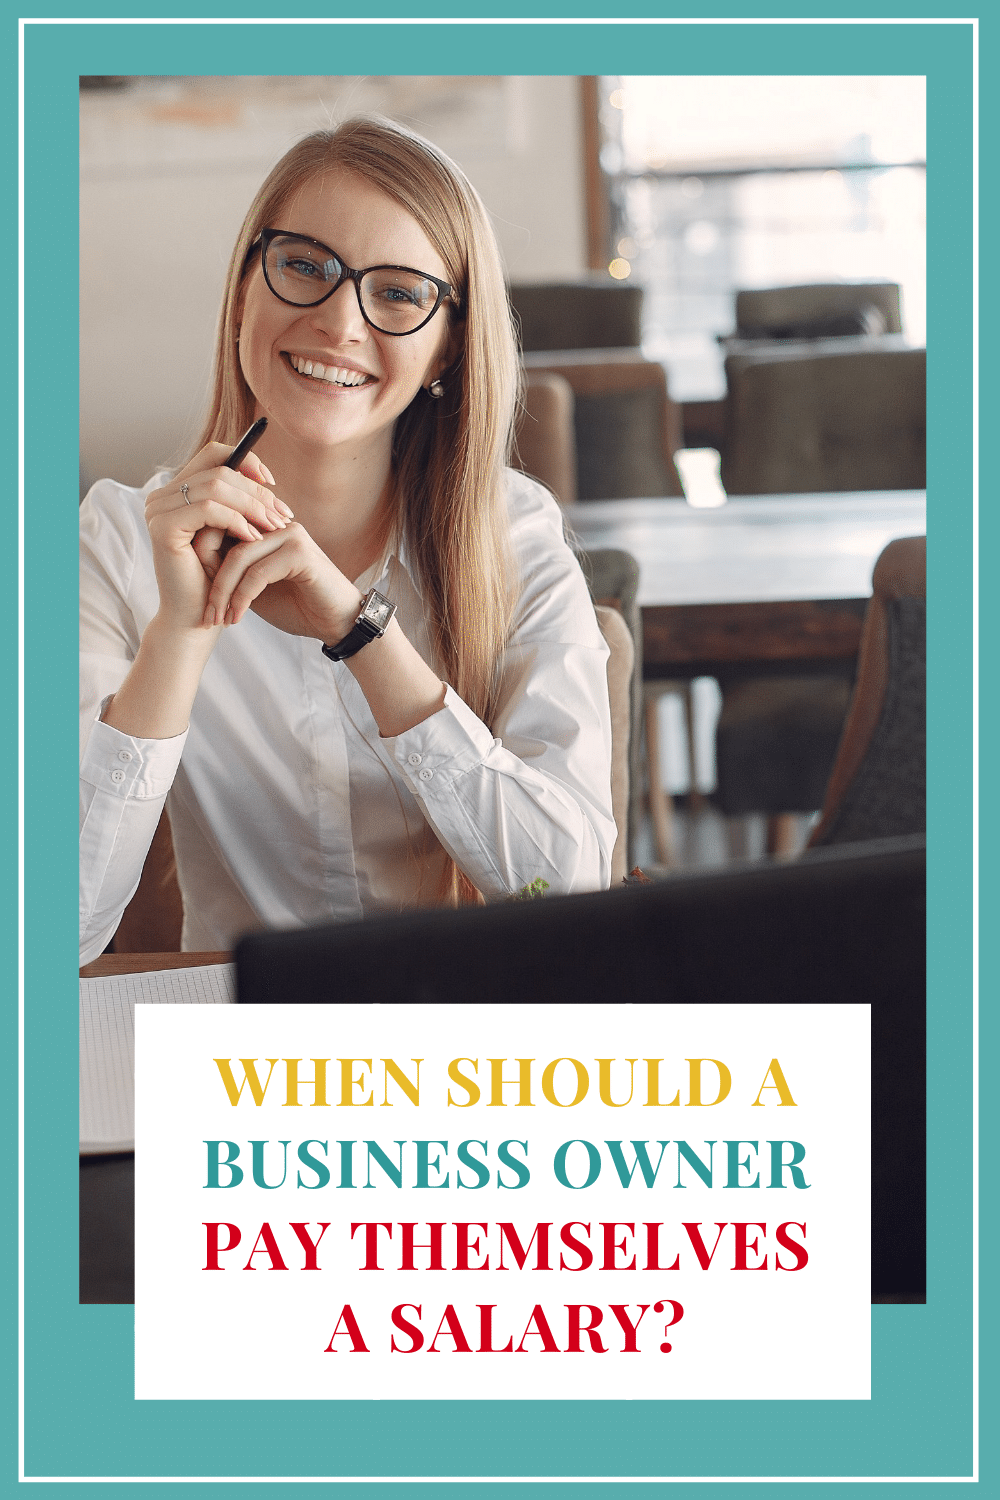 When Should A Business Owner Pay Themselves a consistent Salary